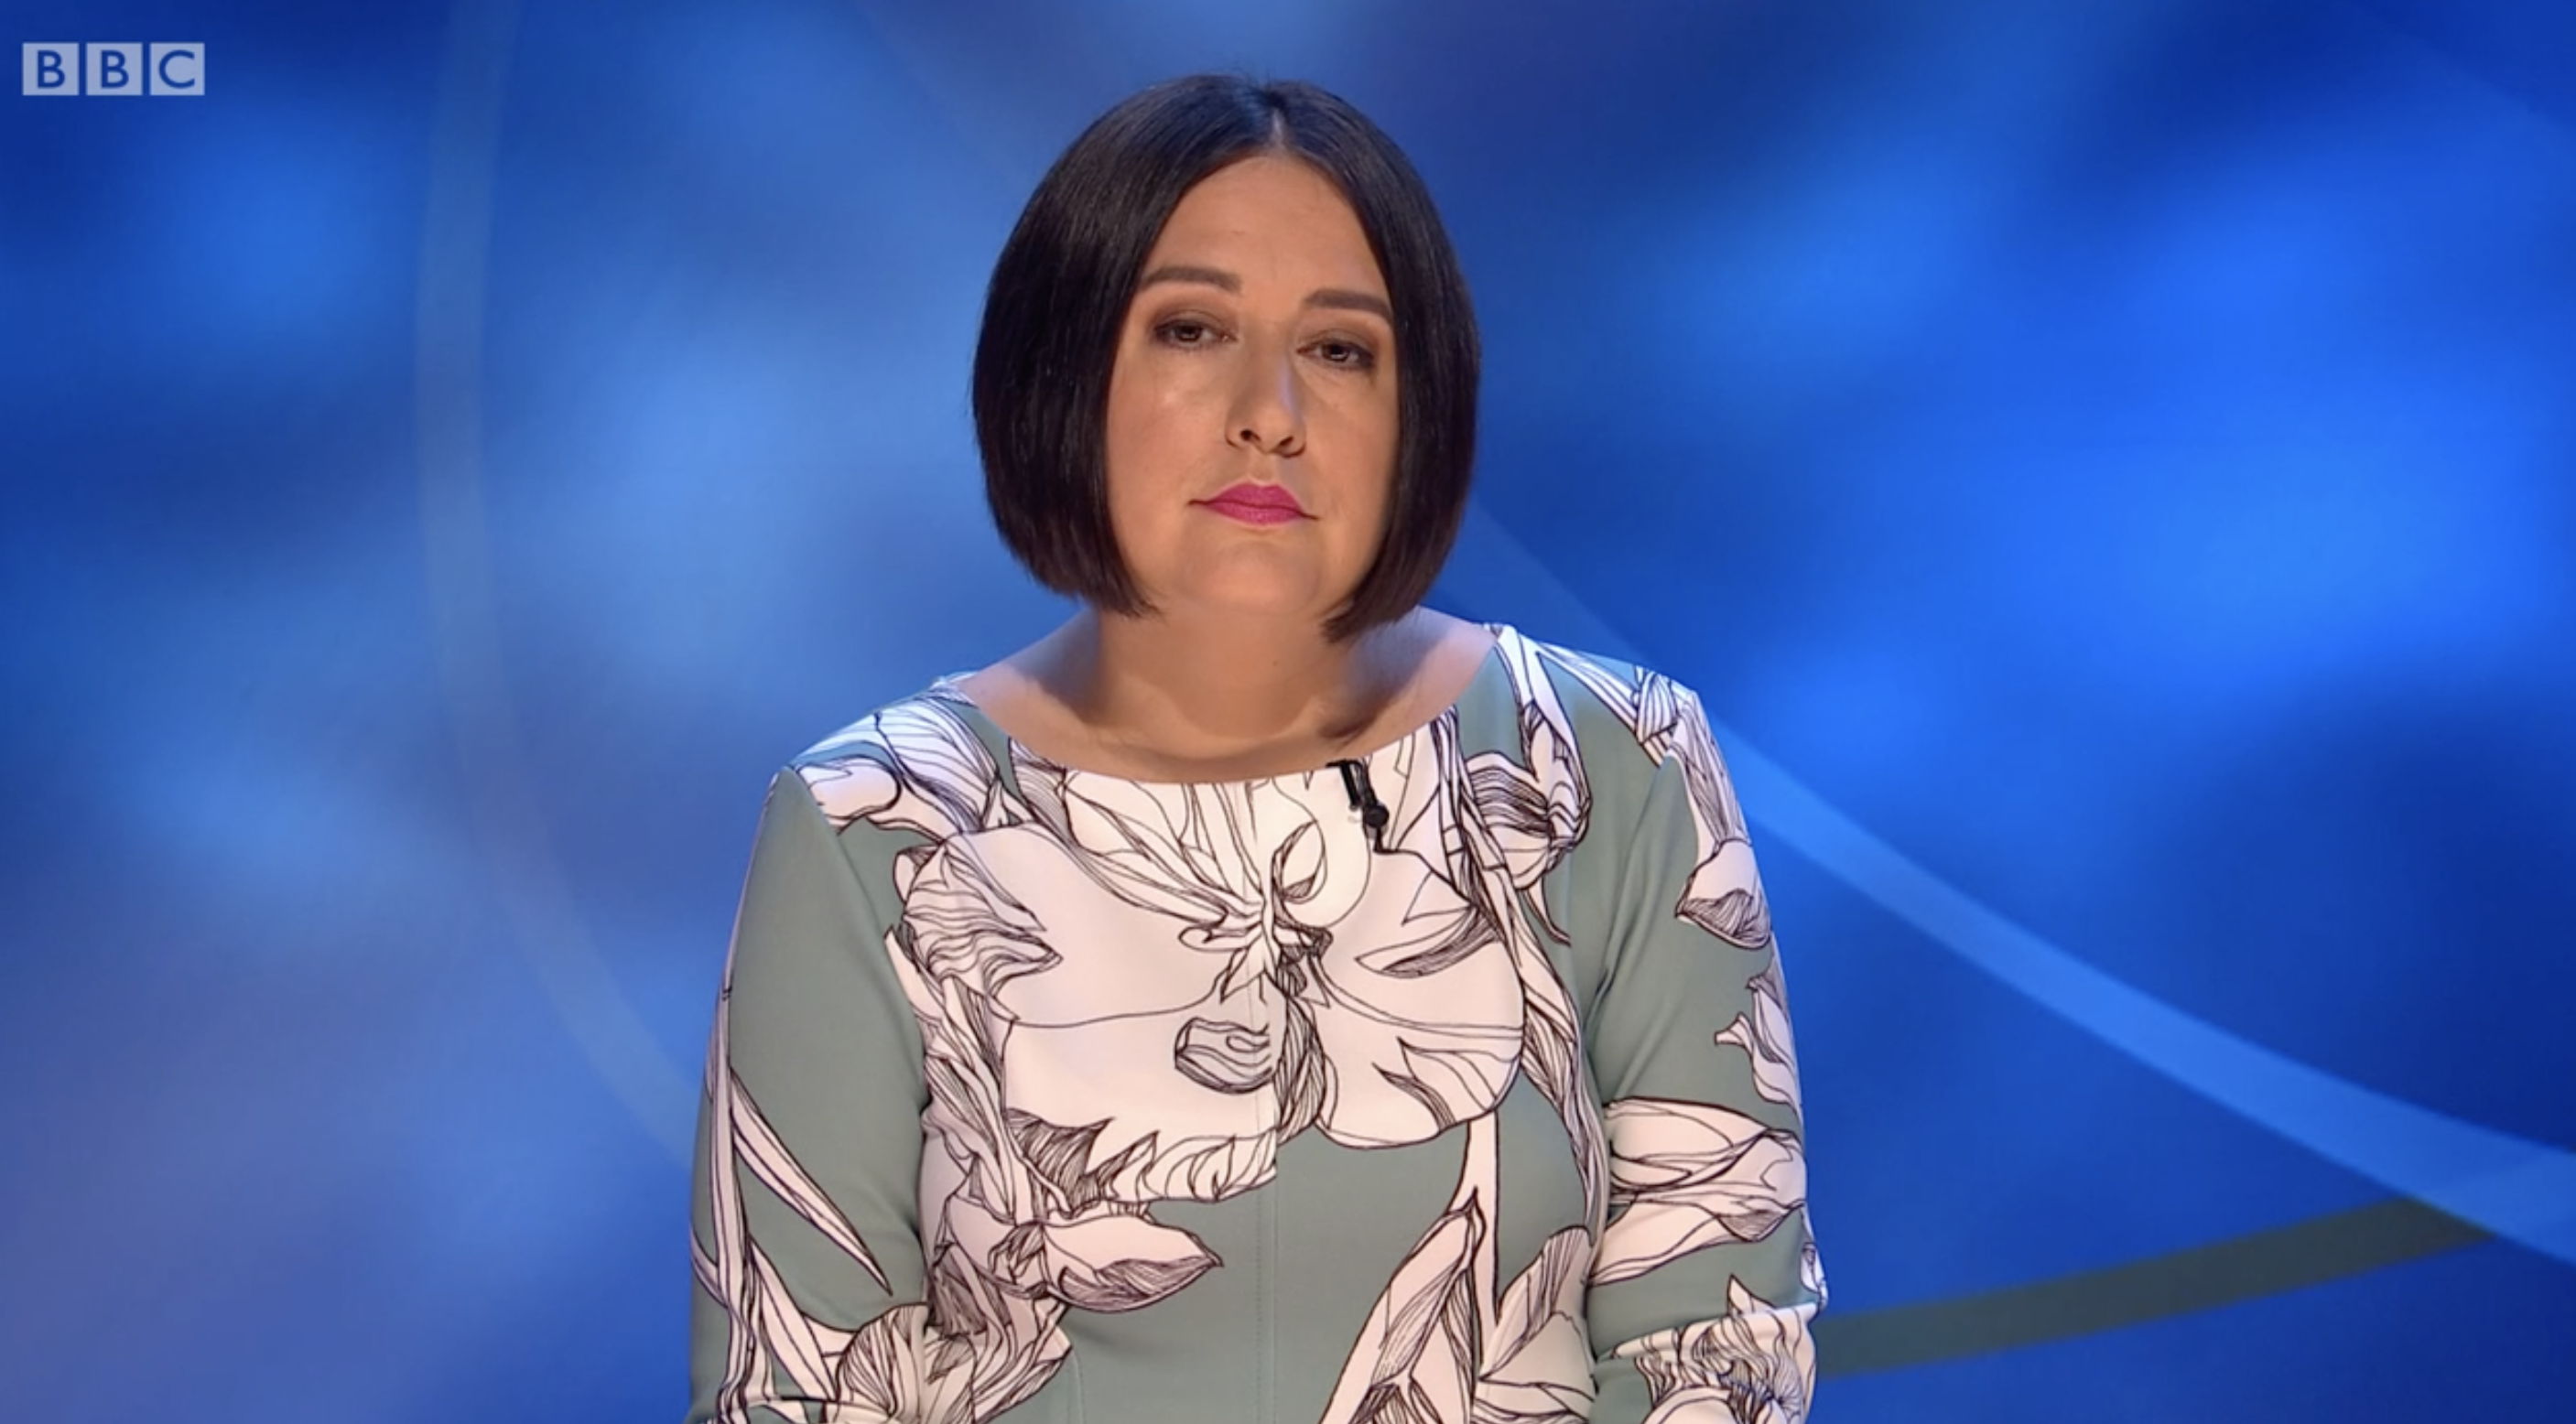 Who is Lisa Thiel from Eggheads? Is she actually a singer?